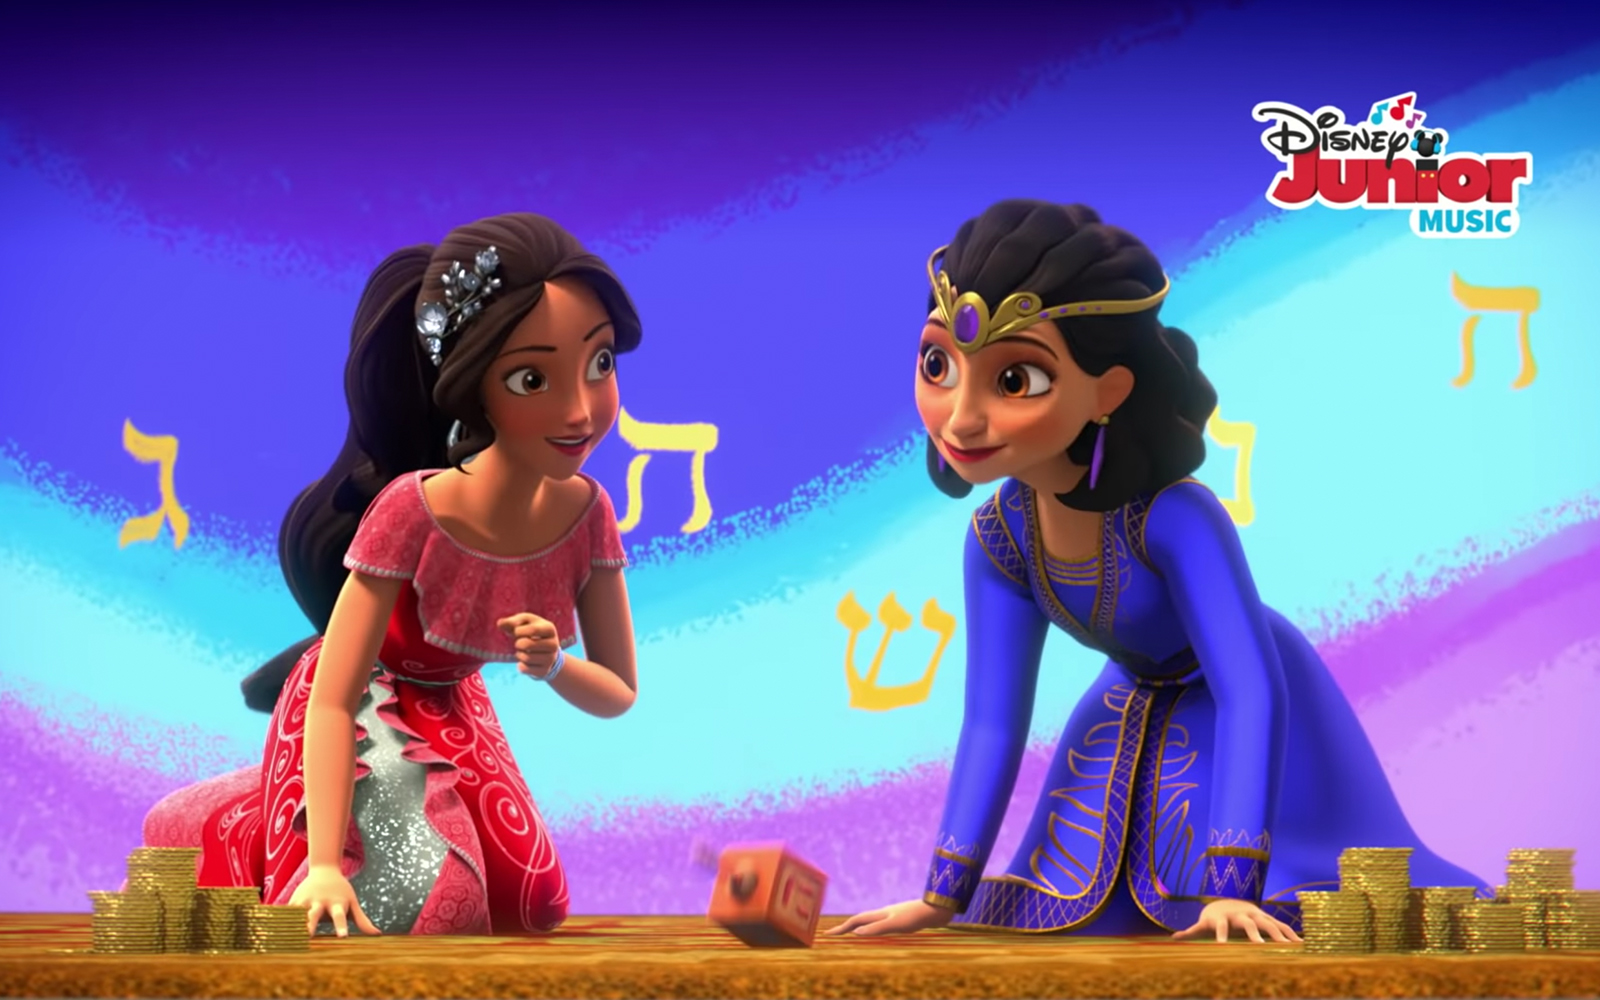 Disney’s ‘elena Of Avalor’ Hanukkah Episode Is A Win For Representation The Times Of Israel